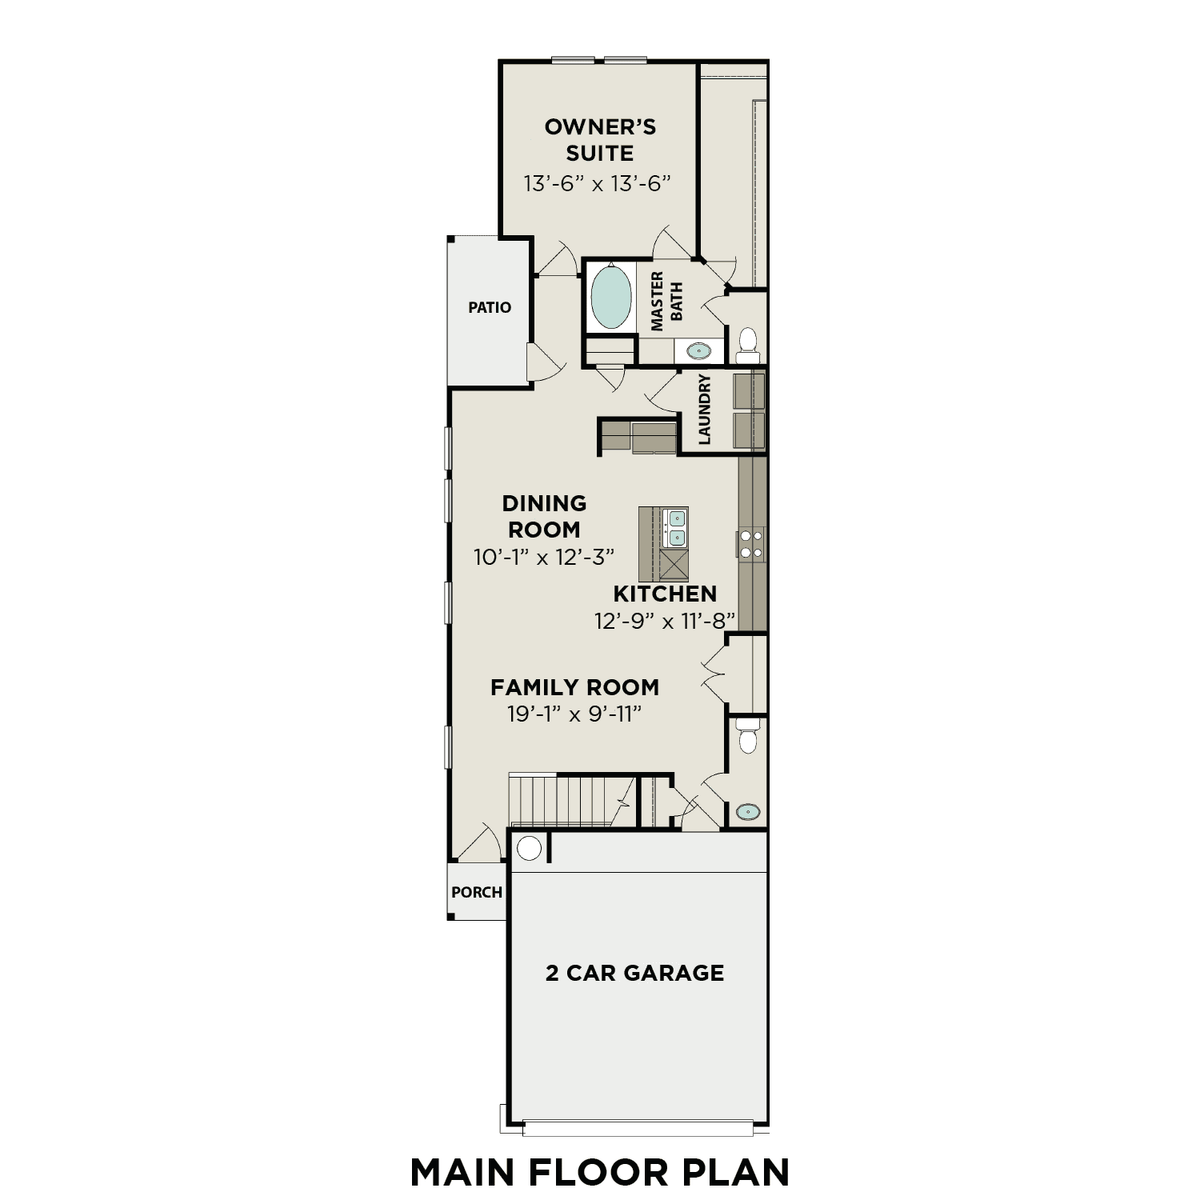 1 - The Rose A floor plan layout for 5203 Shallowhurst Lane in Davidson Homes' Haven at Kieth Harrow community.